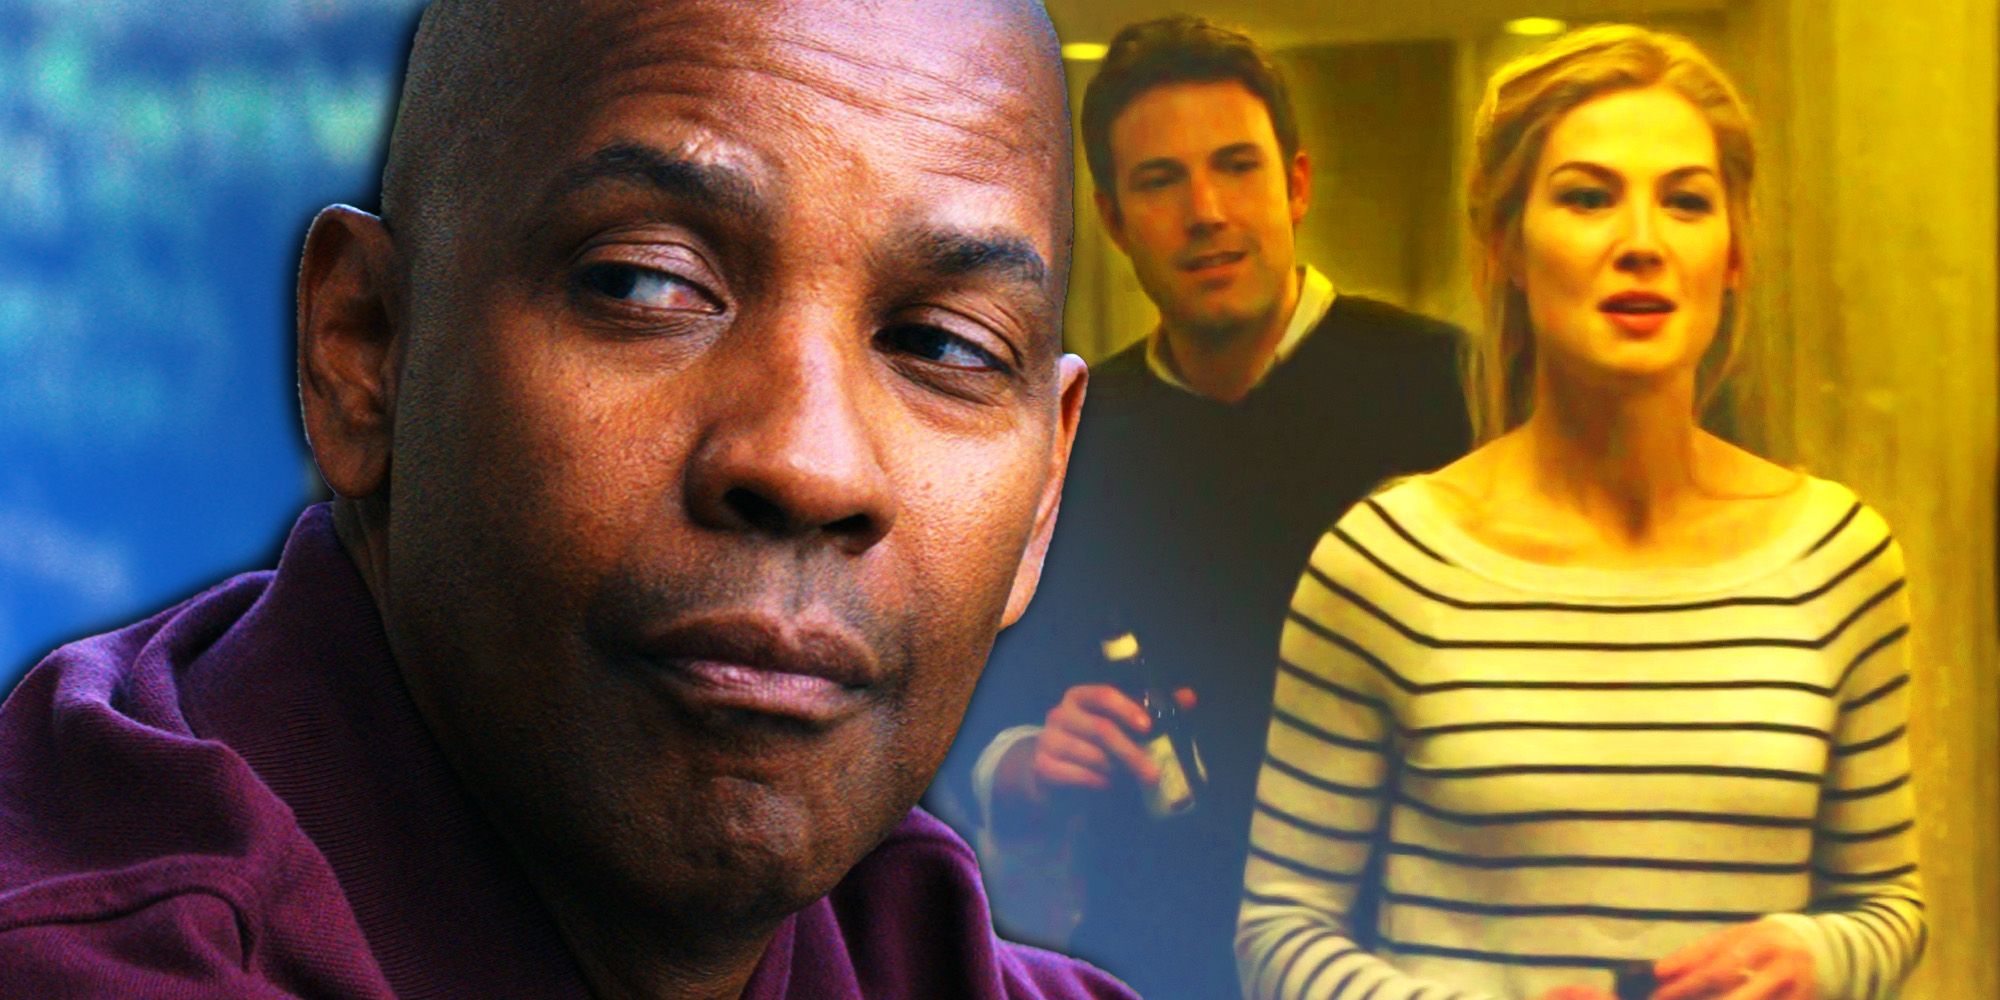 Denzel Washington from The Equalizer and Rosamund Pike and Ben Affleck from Gone Girl